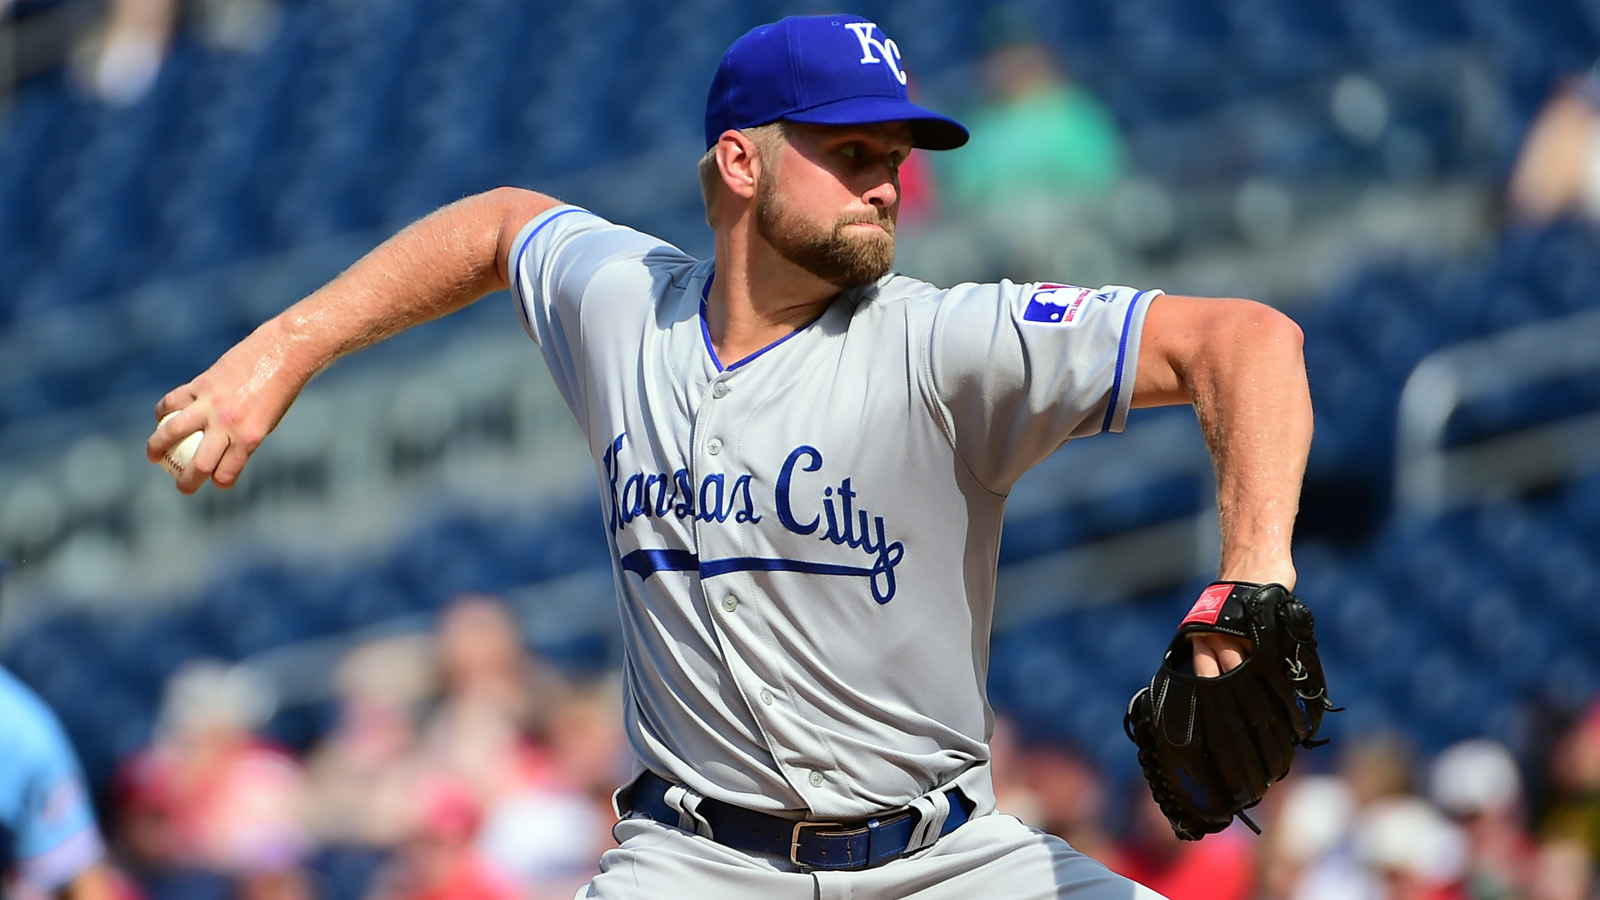 Royals' offense silenced by Scherzer in 6-0 loss to Nationals